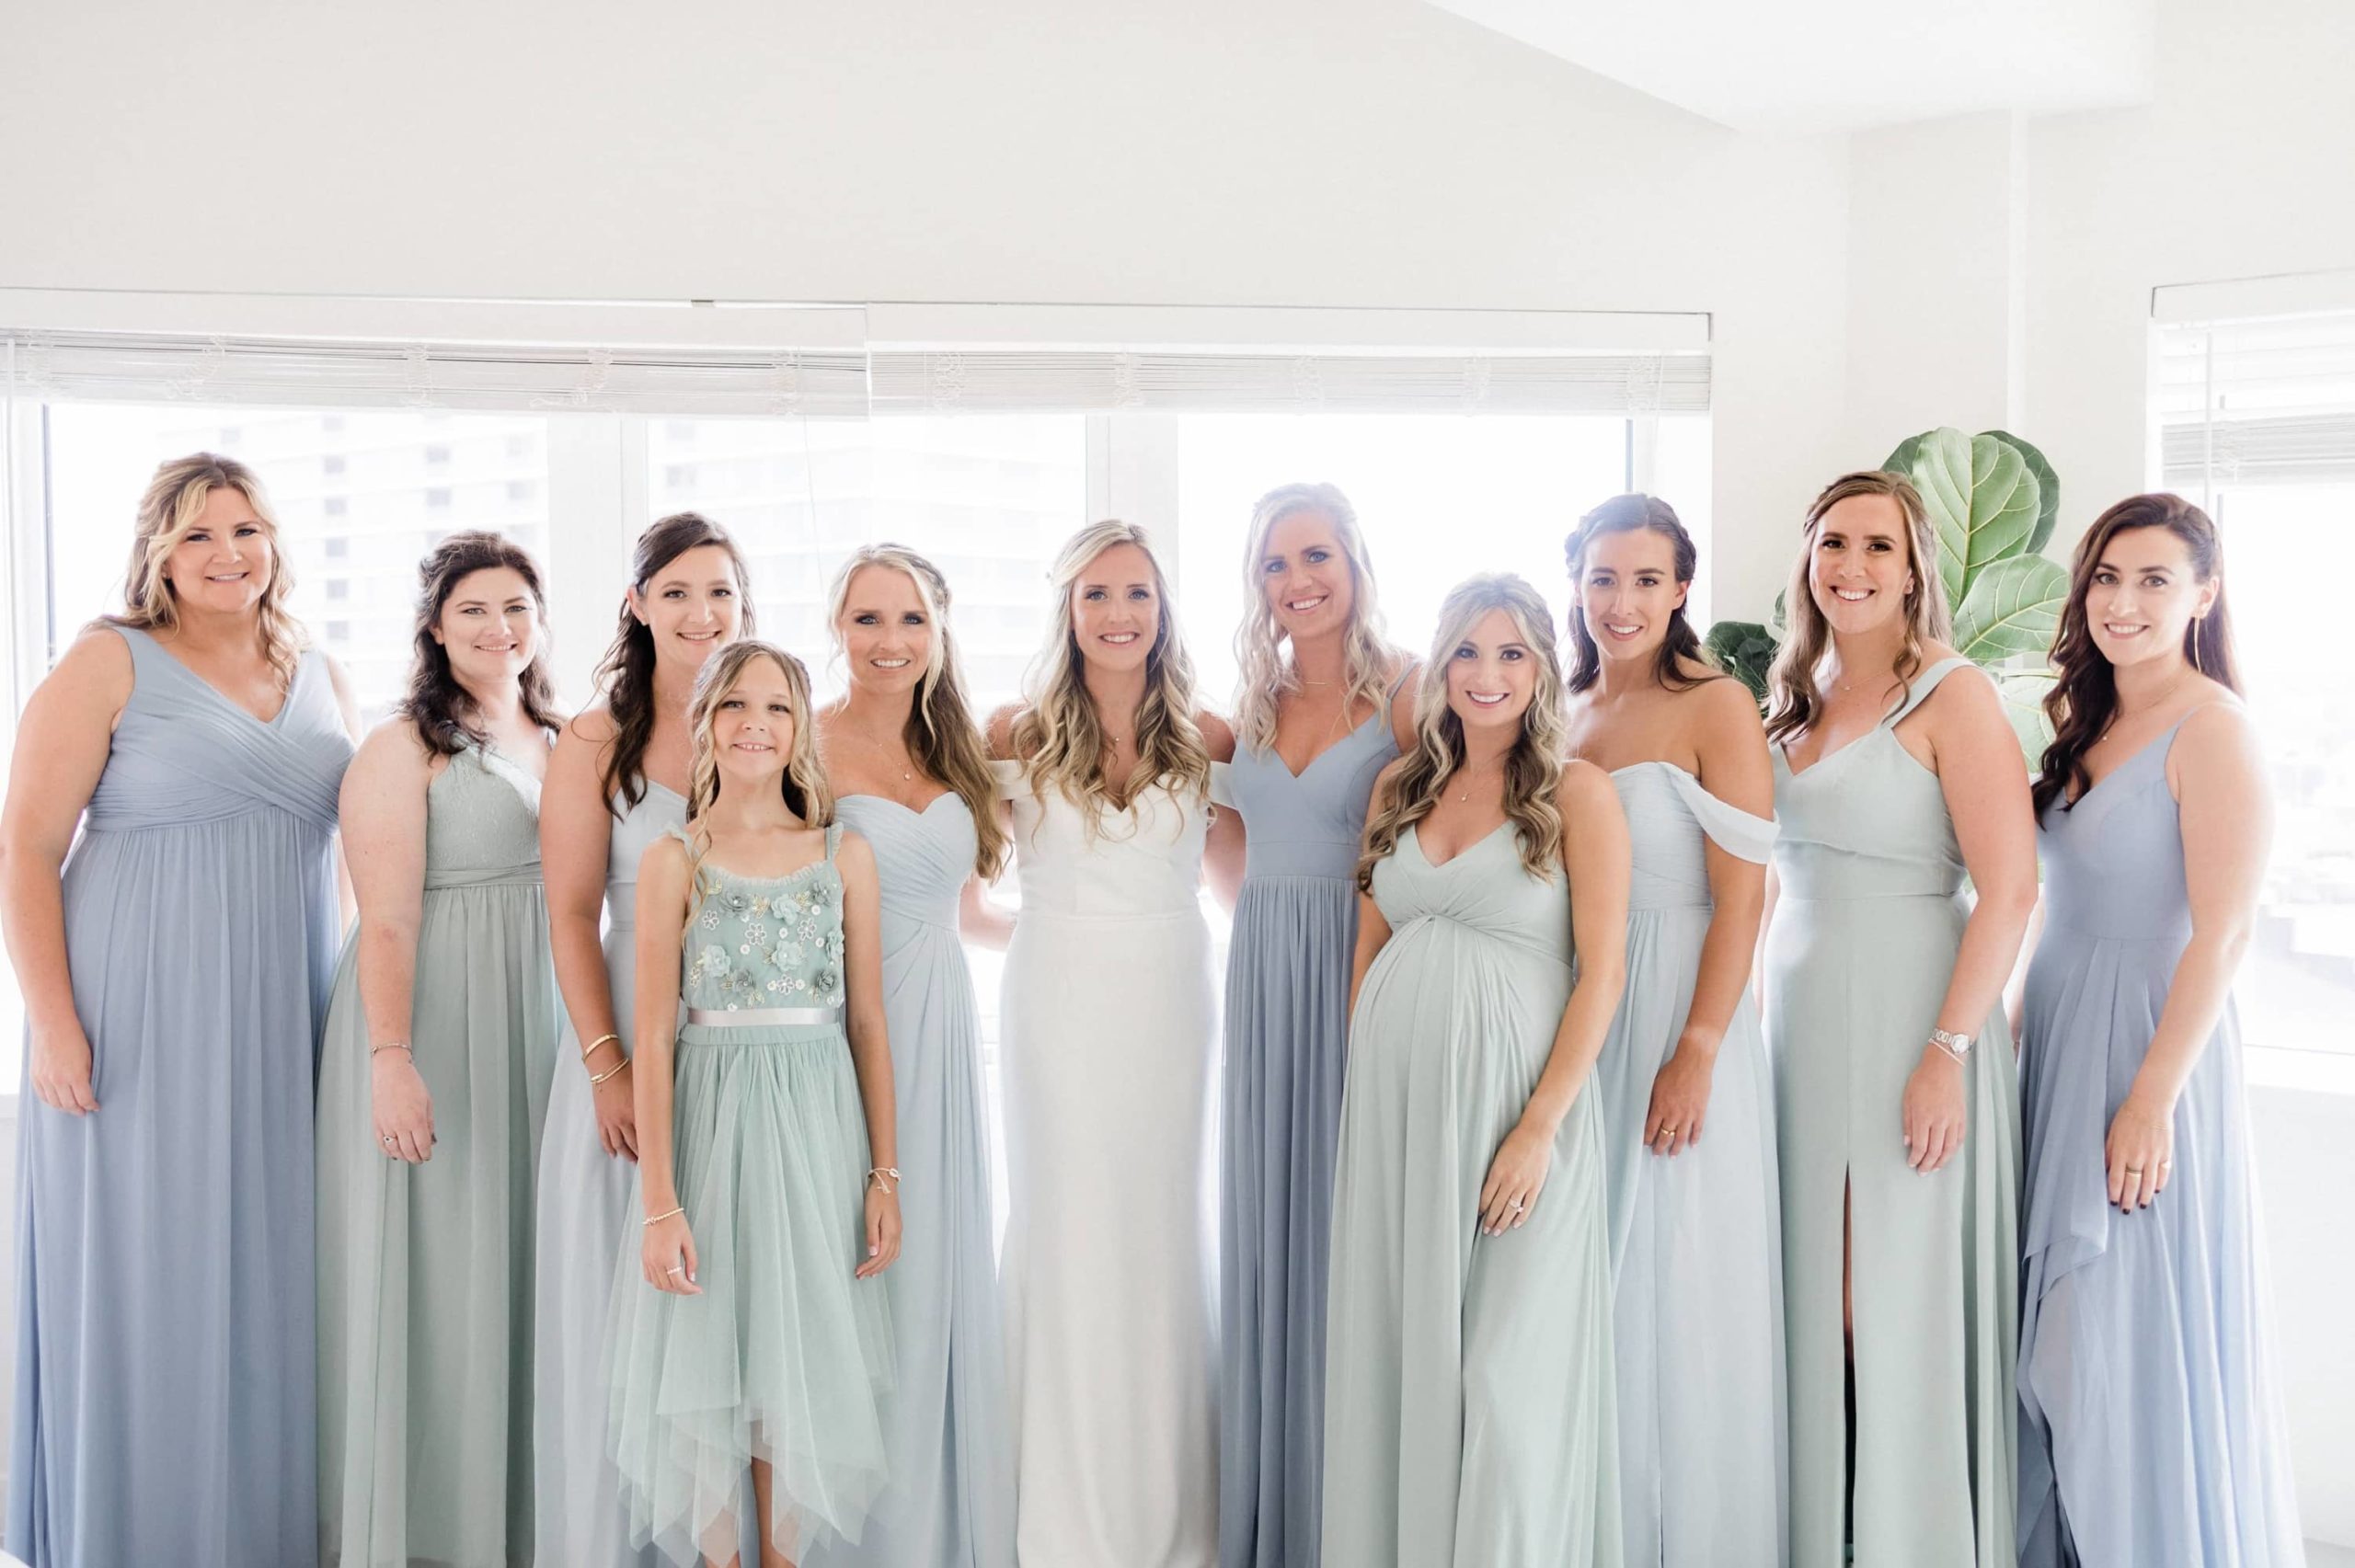 Bride and bridesmaids in blue, teal and green dresses by a window at the asbury hotel.